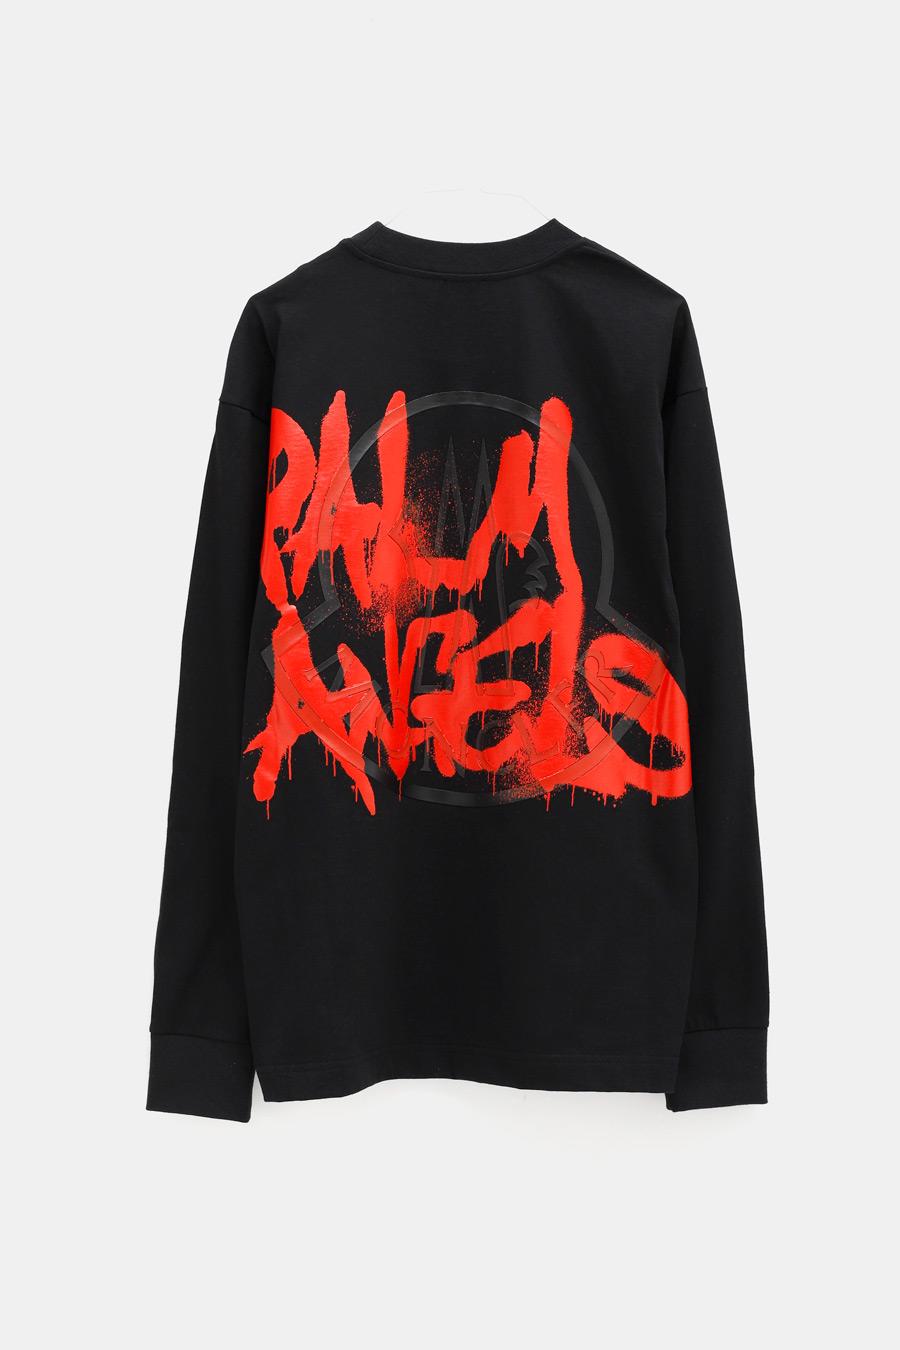 moncler x palm angels long sleeve